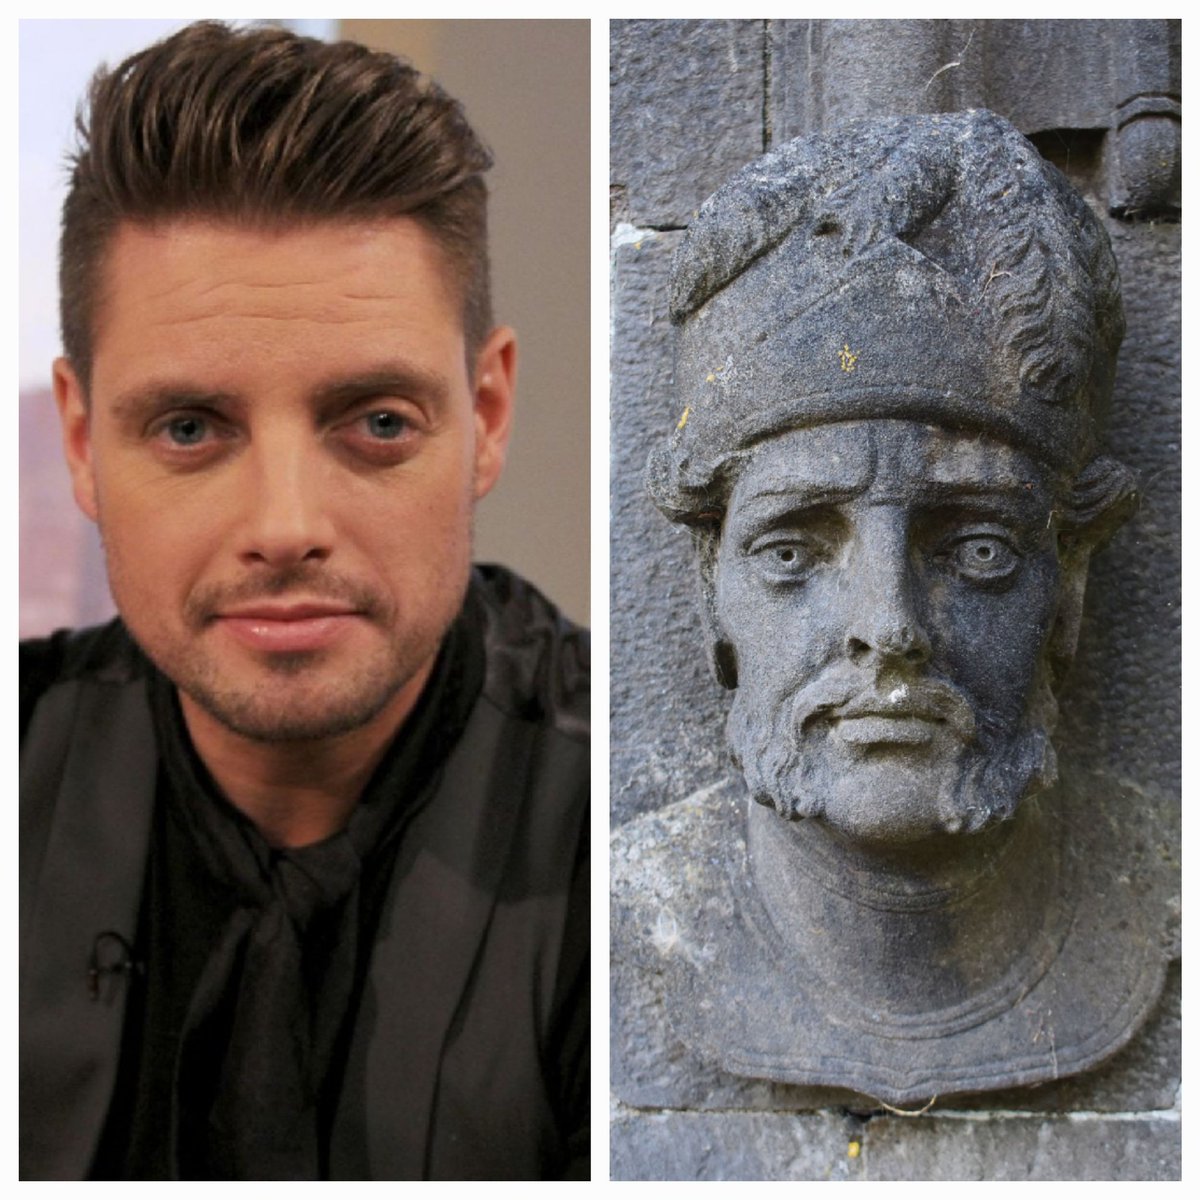 The carving at Kilkenny Castle that bears more than a passing resemblance to Keith Duffy.